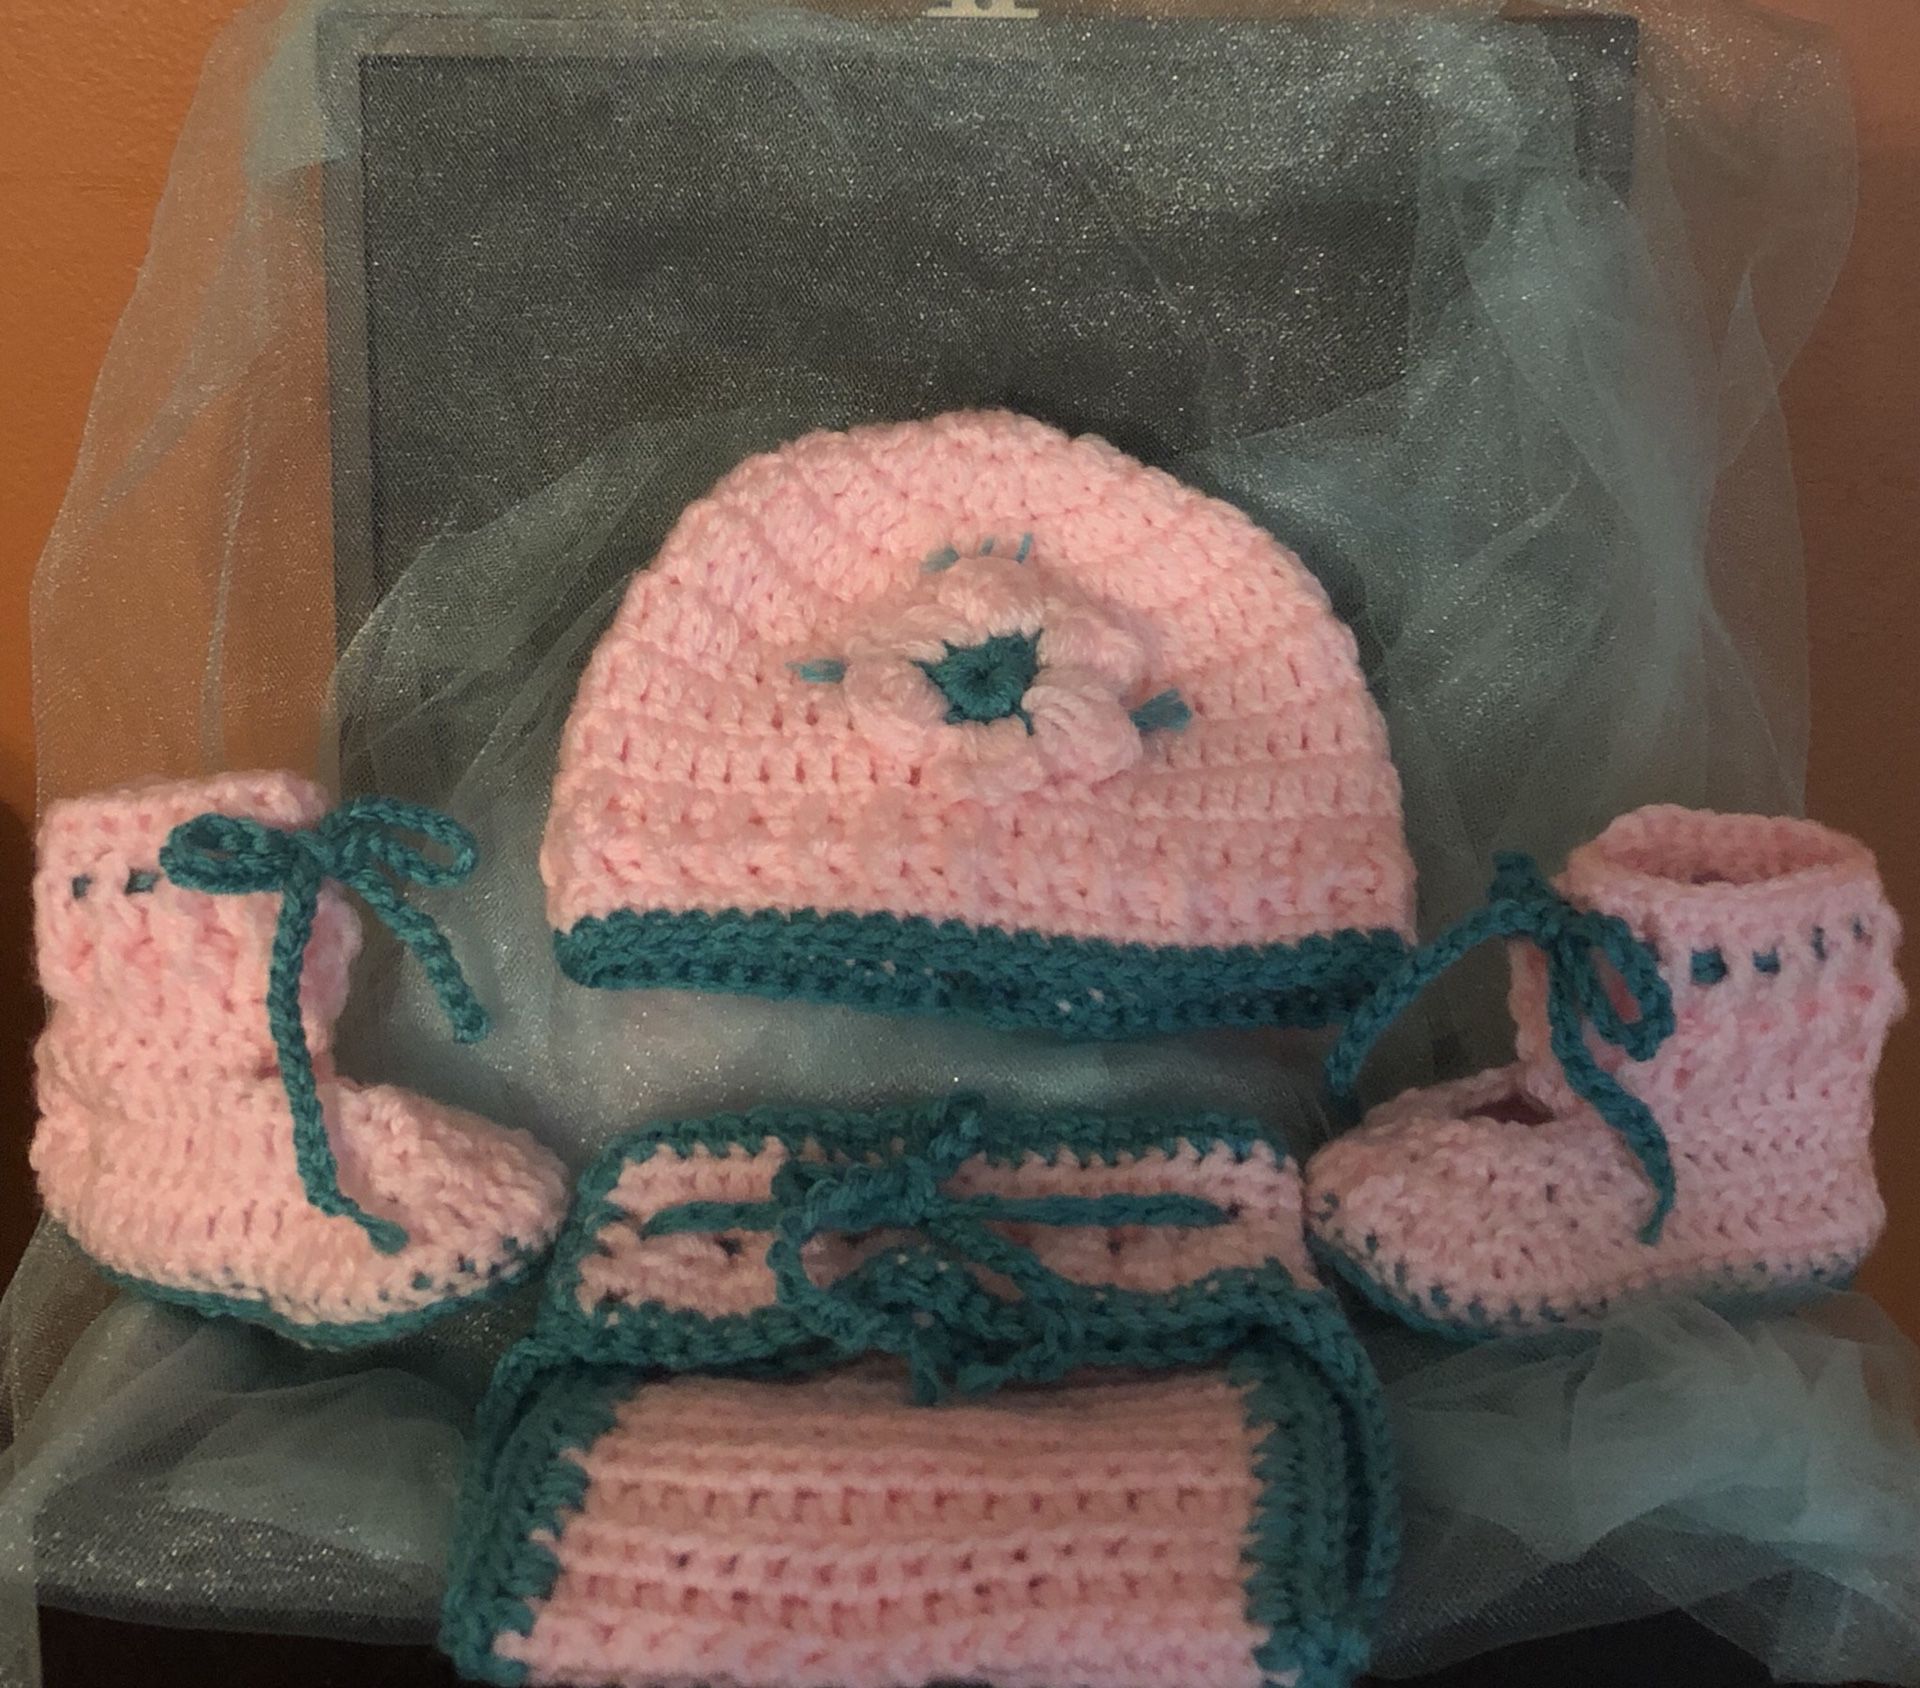 Crochet newborn outfit ( Hat, diaper cover and booties)